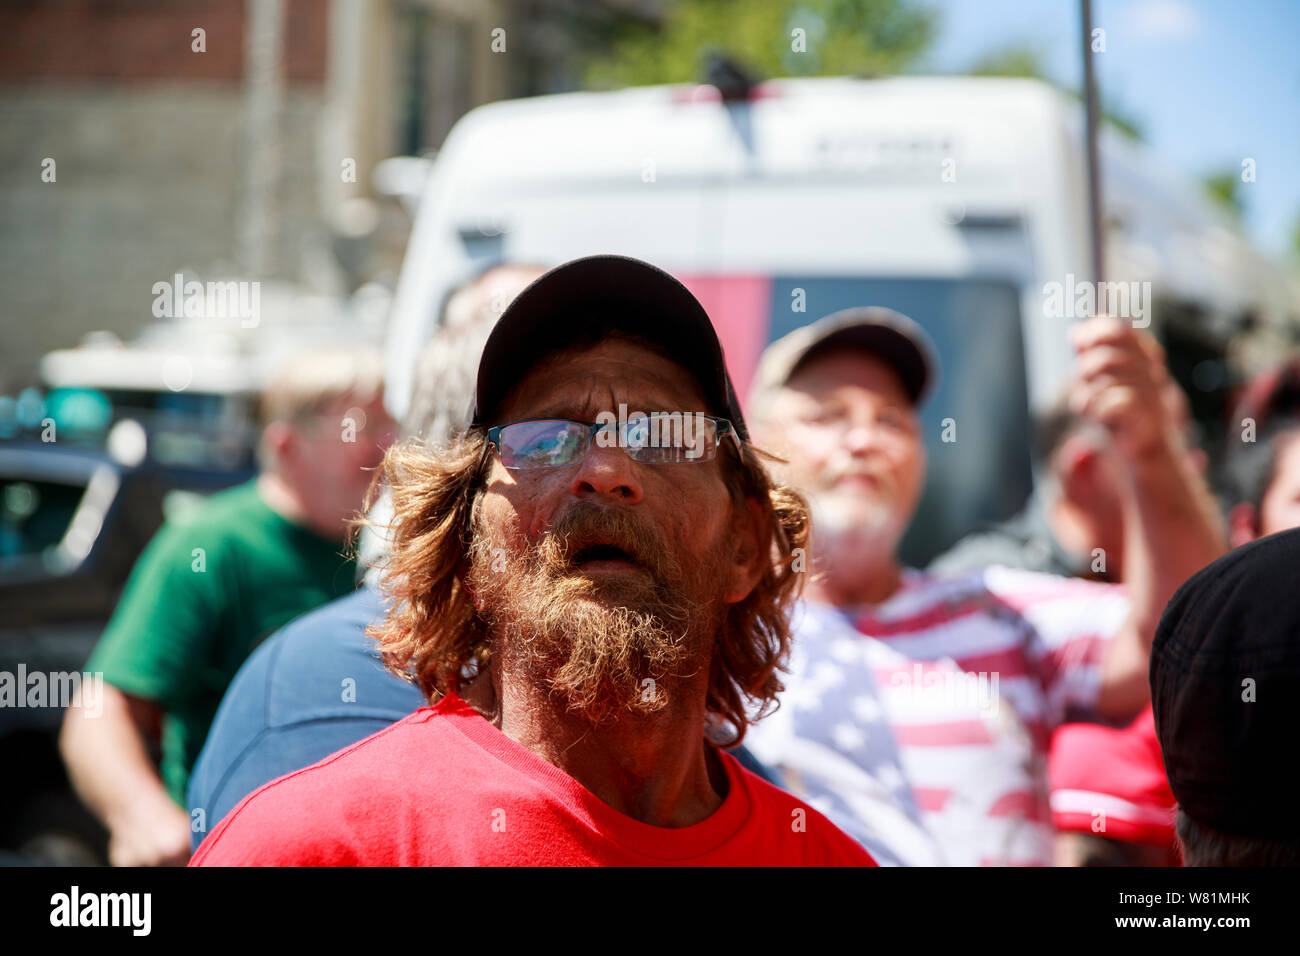 Trump supporters arguing with protesters on on 5th Street at the site of Sunday morning's mass shooting that left 9 dead, and 27 wounded, Wednesday, August 7, 2019 in Dayton, Ohio. Trump visited a nearby hospital but did not visit the site of the shooting before flying to El Paso, Texas, which was also the site of a mass shooting. Stock Photo